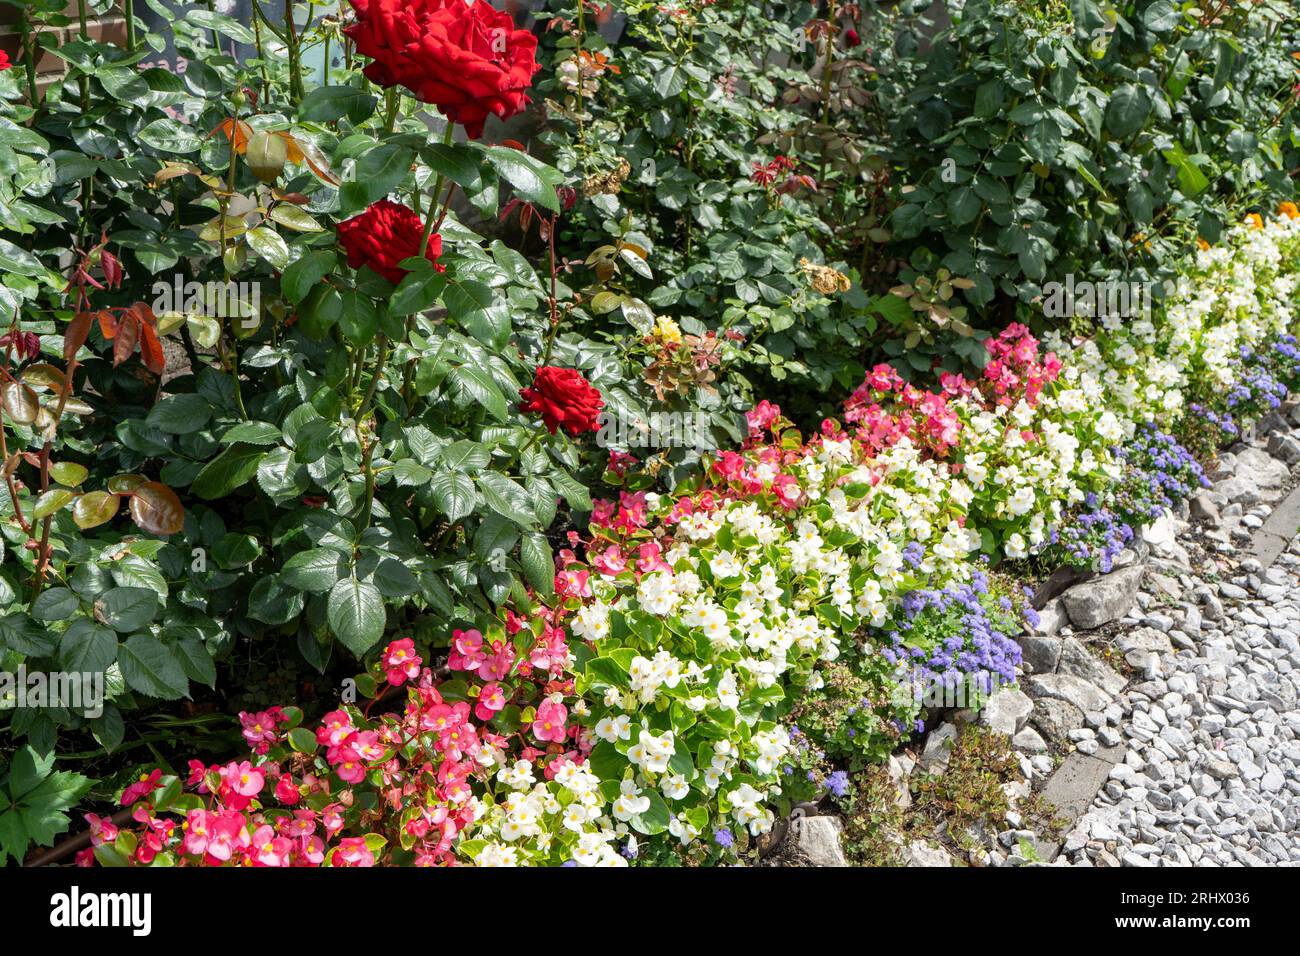 Multi-colored begonias on a street flower bed. Red, pink and white begonia. Flower arrangement in the garden. Garden landscape design. Grow flowers outside. Flowering in summer. Simple plants tuberous Stock Photo